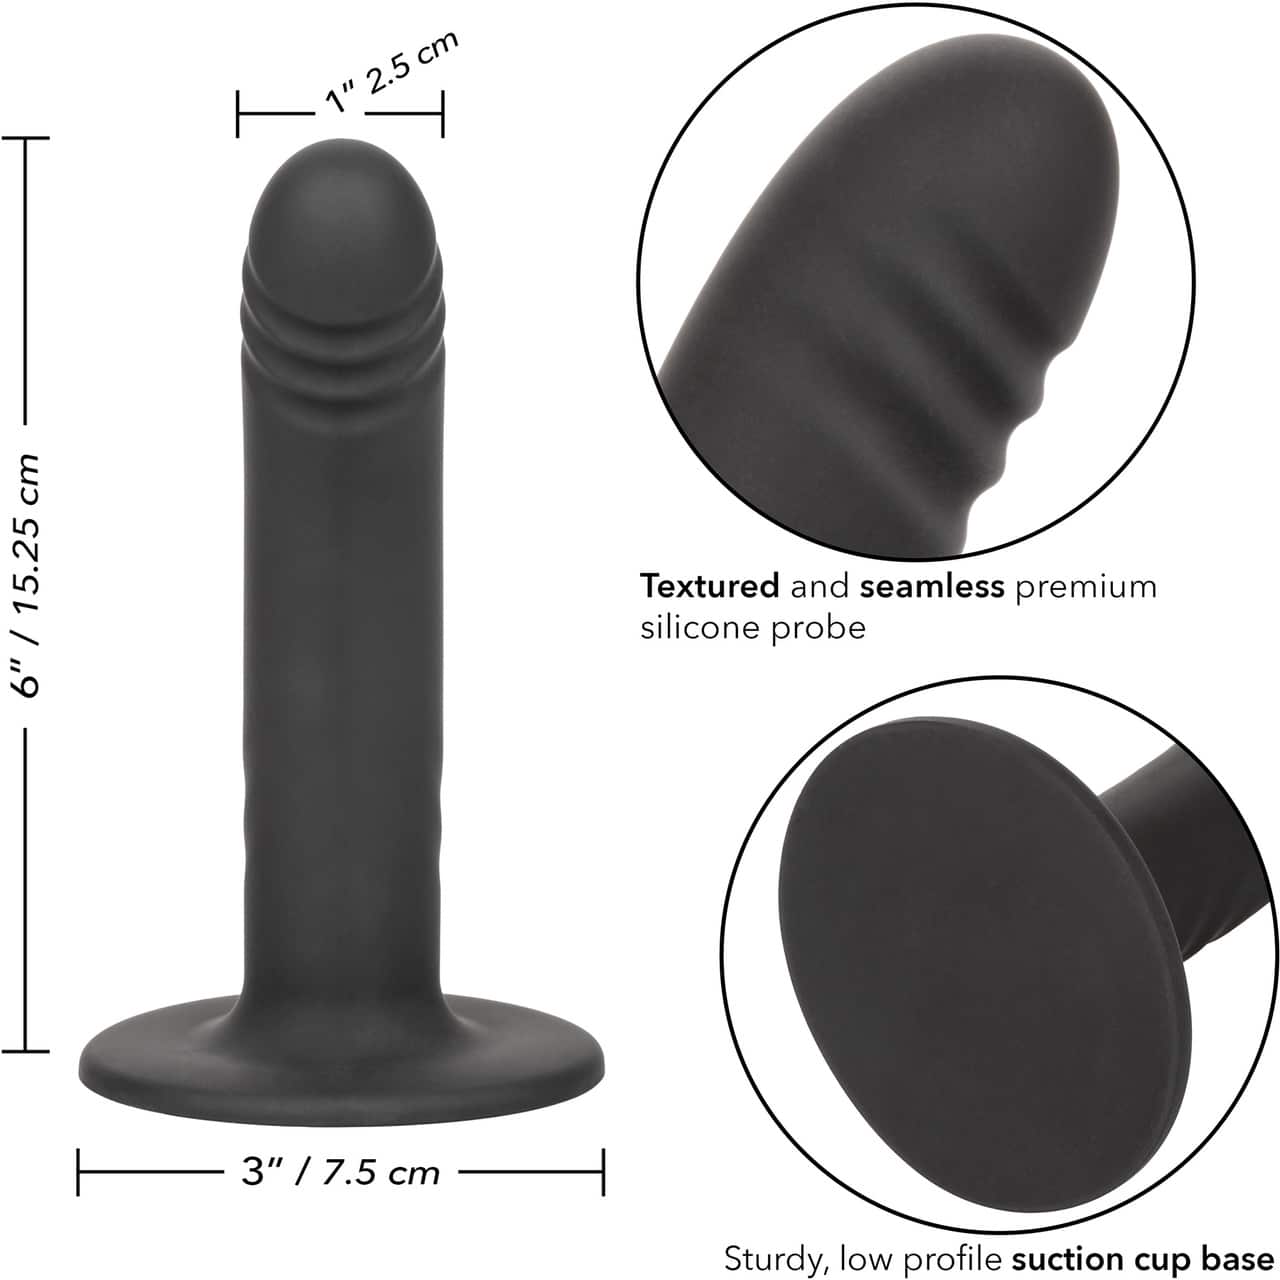 Boundless 6" Ridged Silicone Suction Cup Dildo. Slide 7